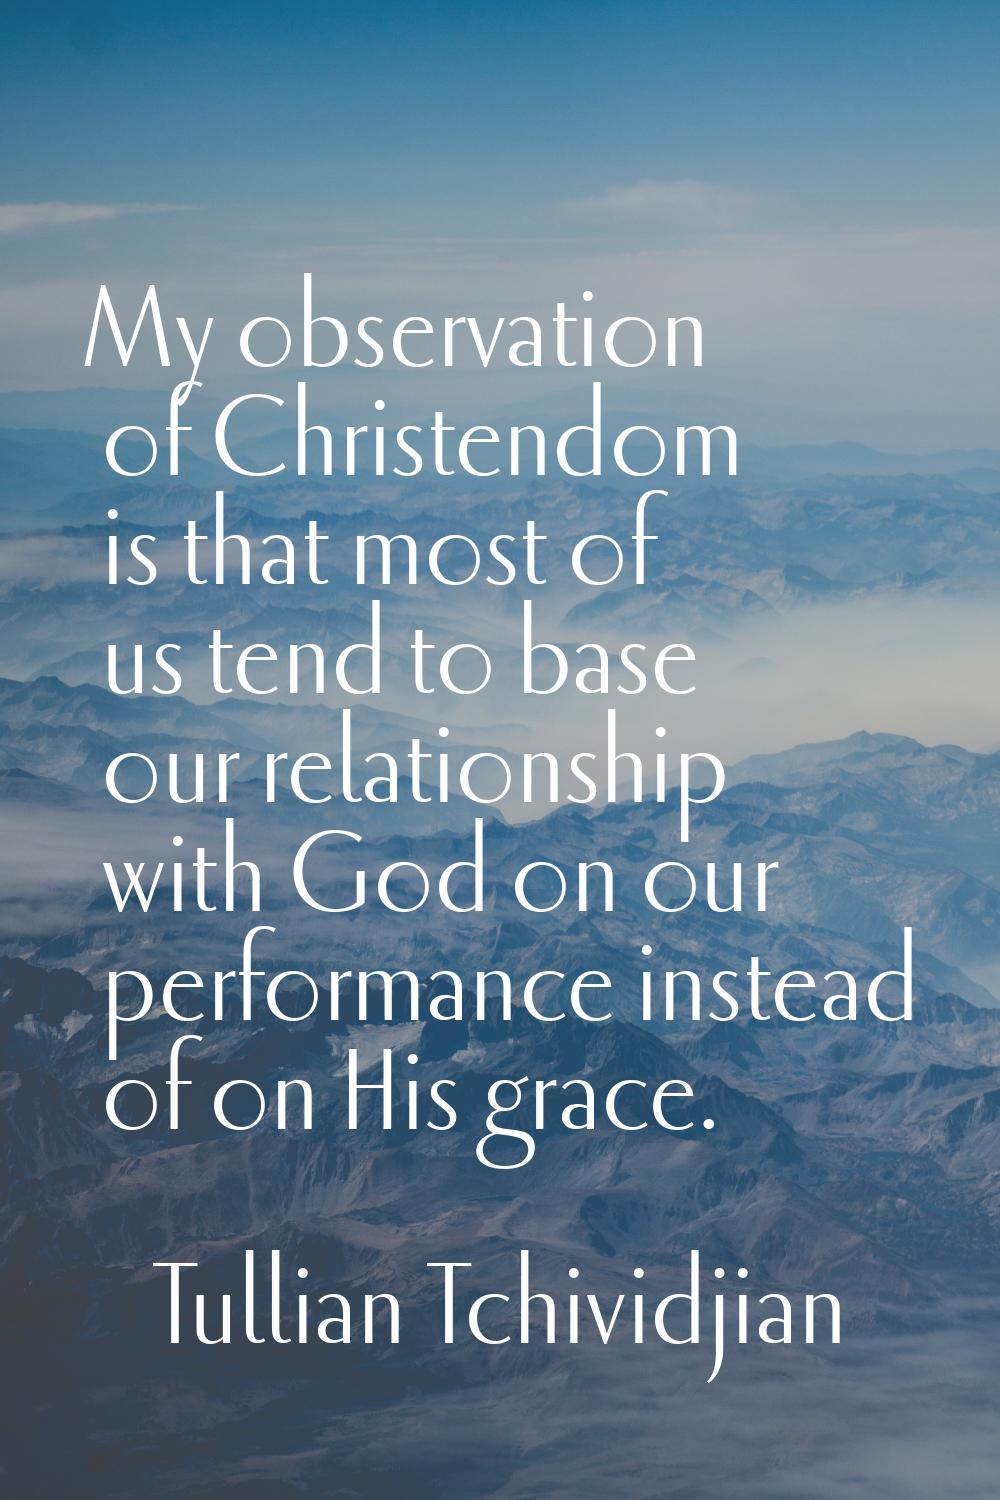 My observation of Christendom is that most of us tend to base our relationship with God on our perf